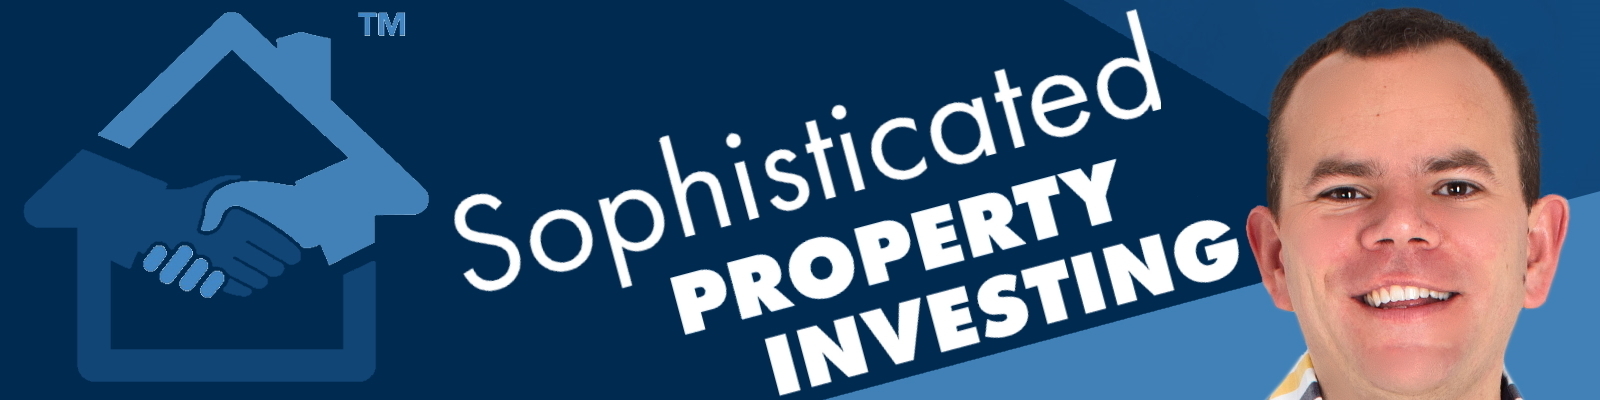 Sophisticated Property Investing by Ethical Property Partners